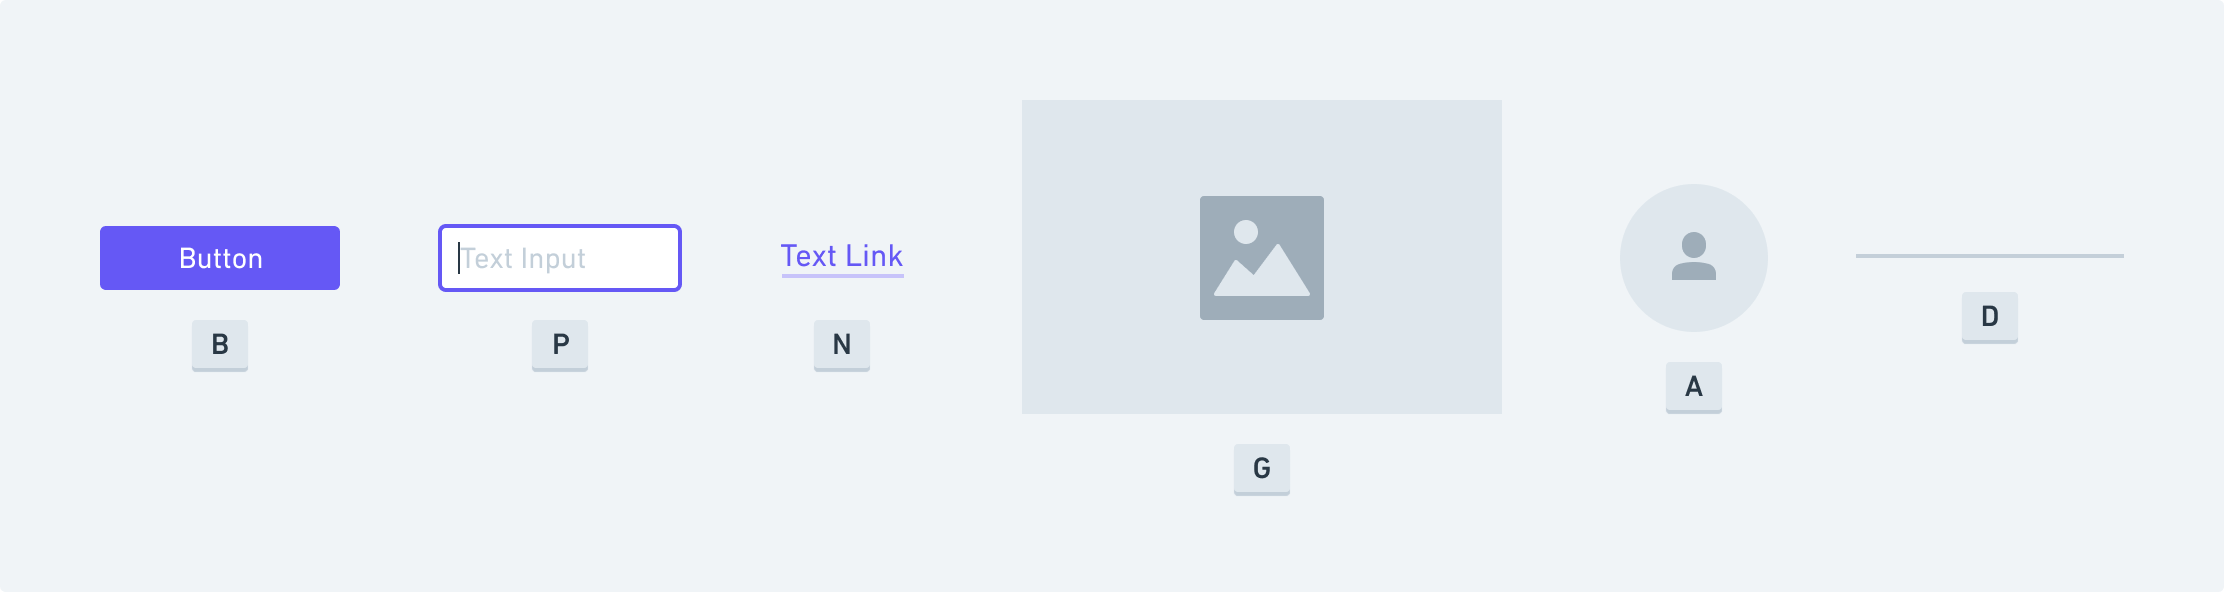 Wireframe-specific shortcuts for elements like buttons, text inputs, images, and more